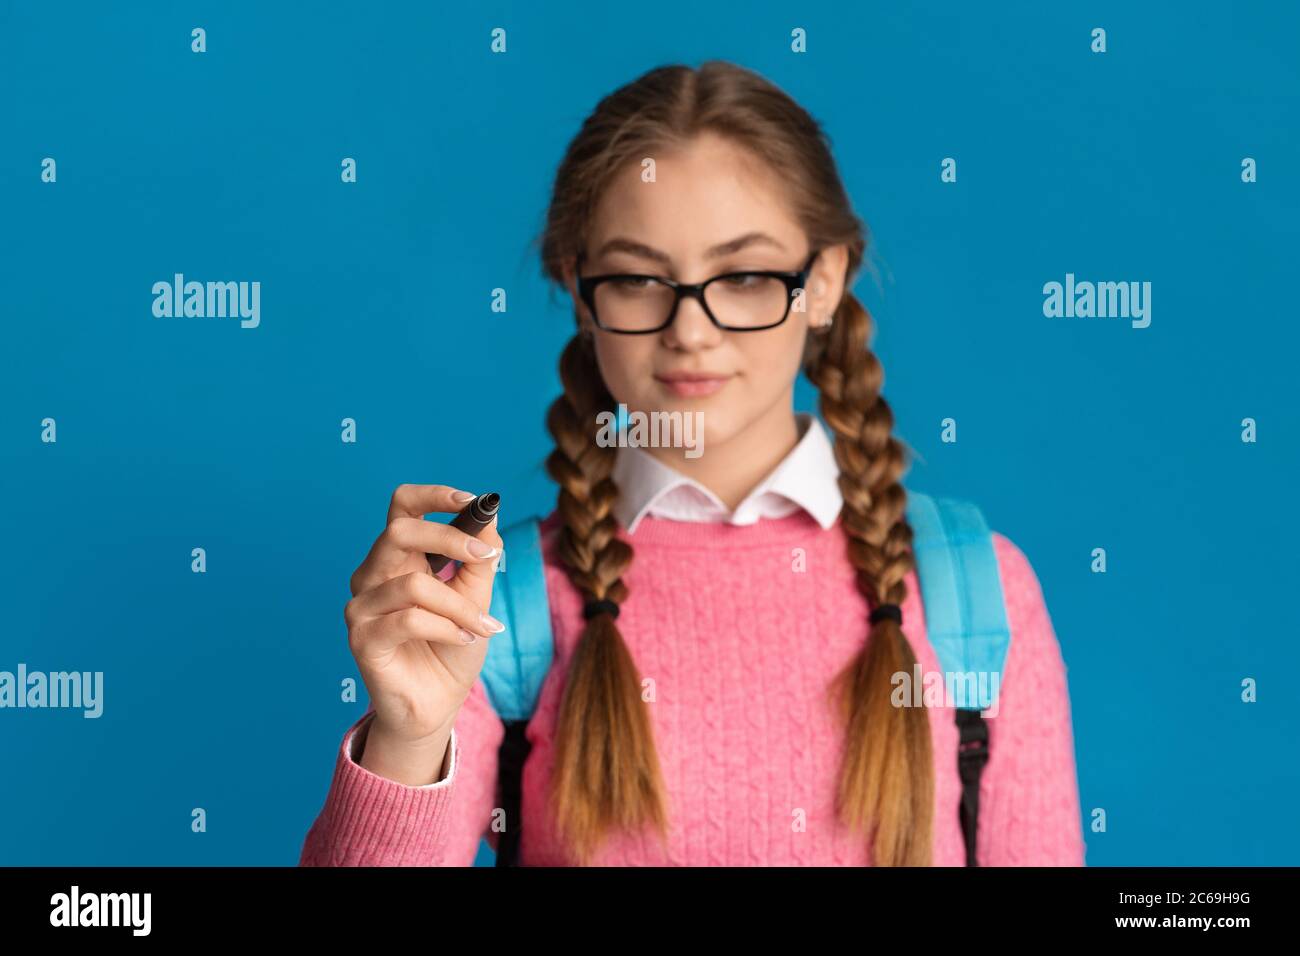 Girl teenager with pigtails and glasses writes with marker on screen Stock  Photo - Alamy